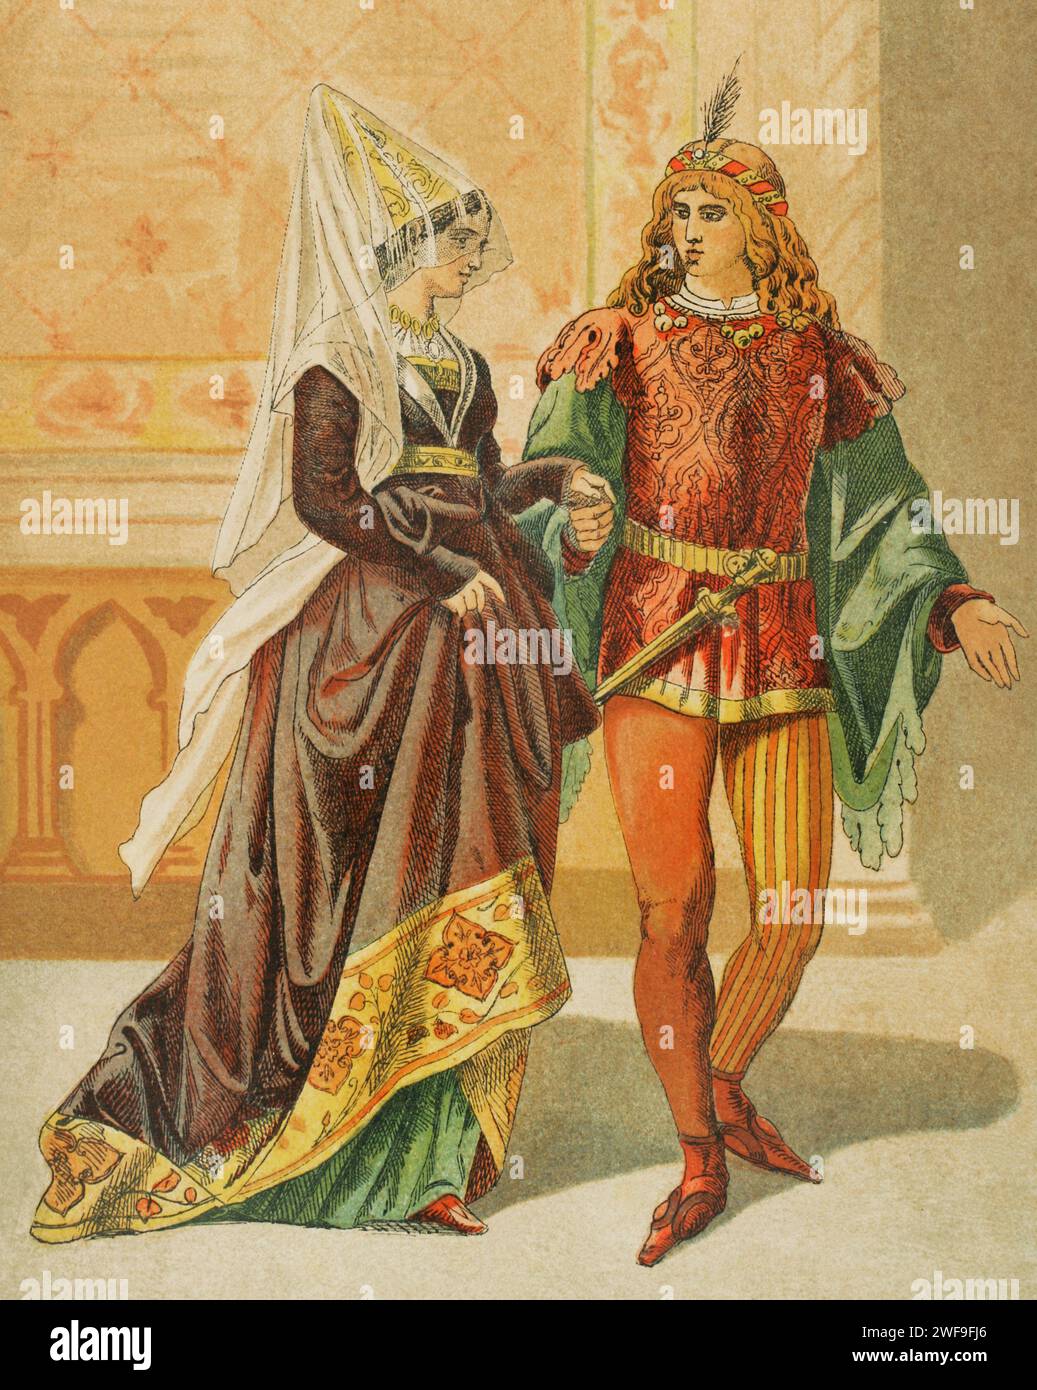 Europe. 14th century. Lady and minstrel. Chromolithography. 'Historia Universal', by César Cantú. Volume VI, 1885. Stock Photo